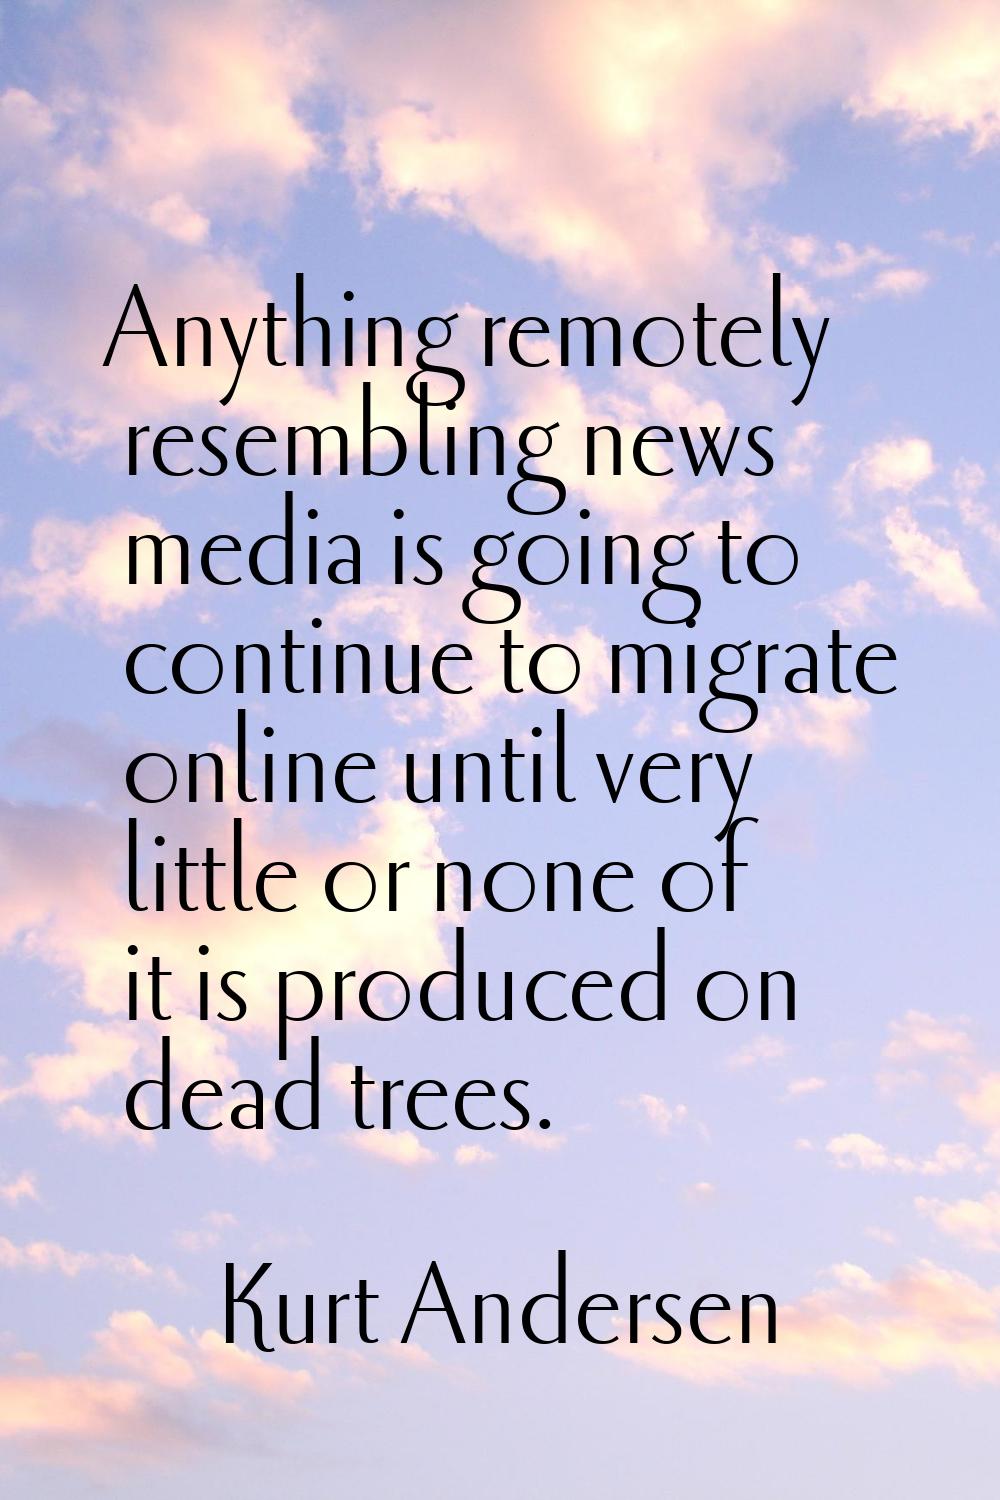 Anything remotely resembling news media is going to continue to migrate online until very little or